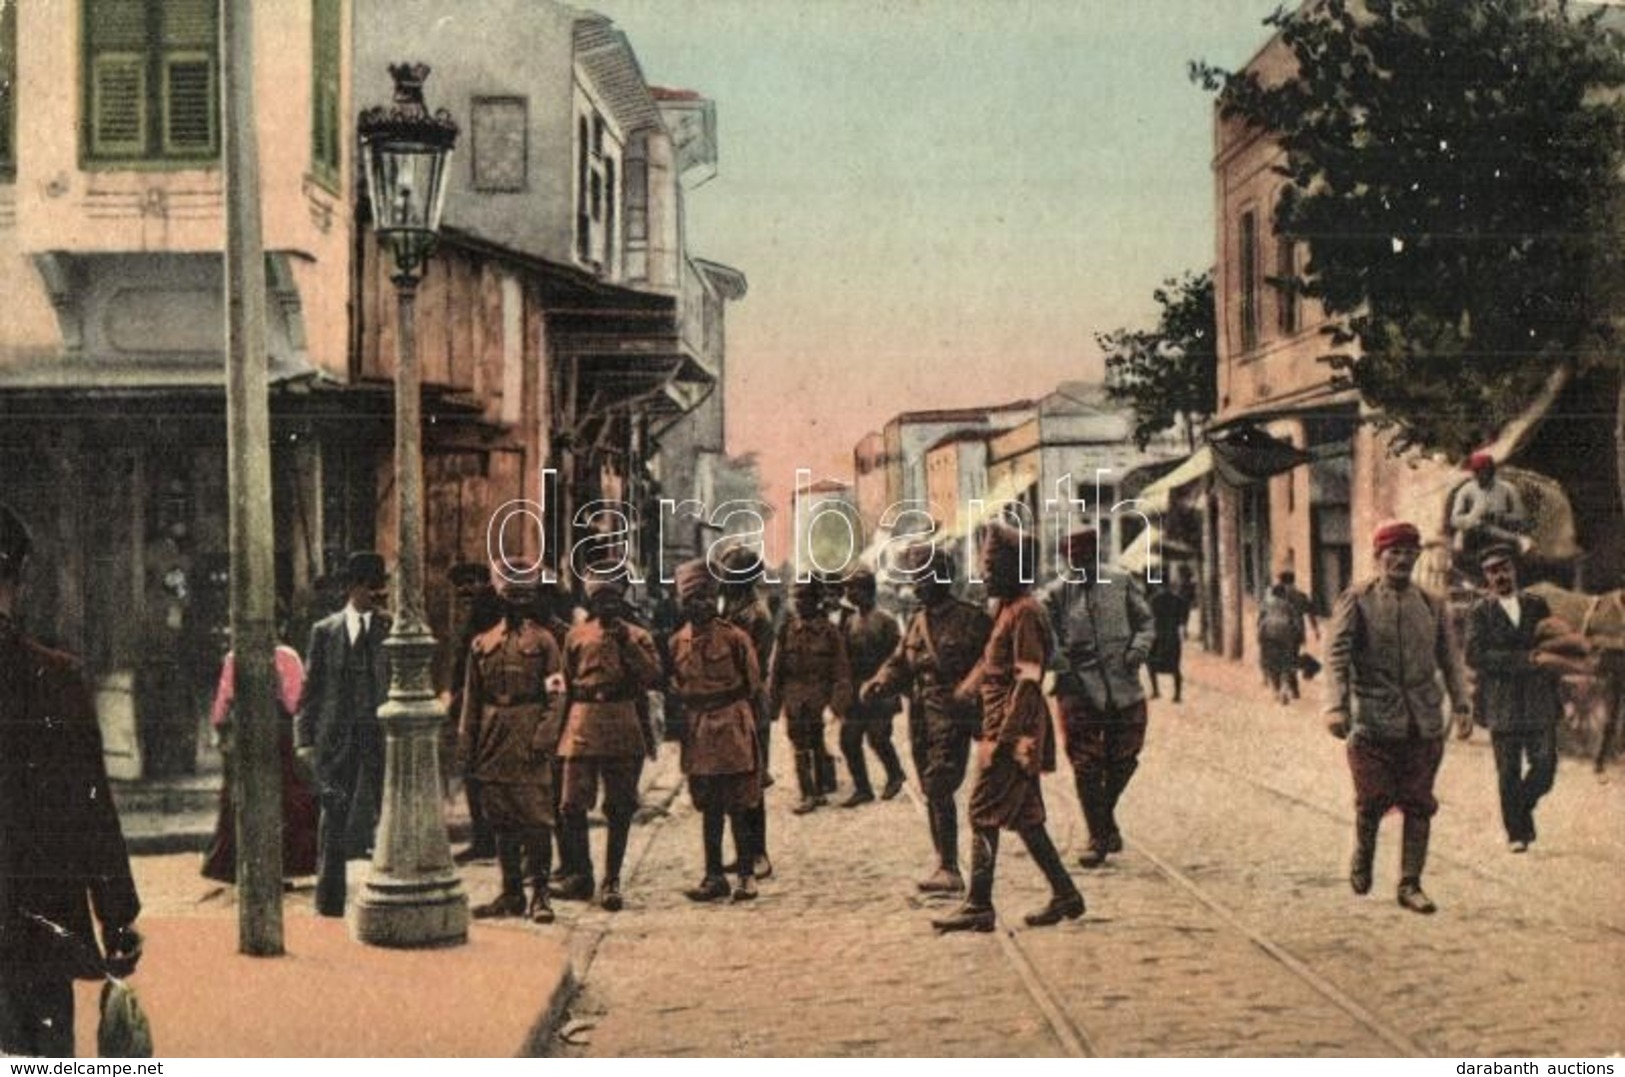 ** T2/T3 Truppe Indiane A Salonicco / Troupes Hindoues A Salonique / Indian Troops At Salonica (Thessaloniki) (EK) - Ohne Zuordnung